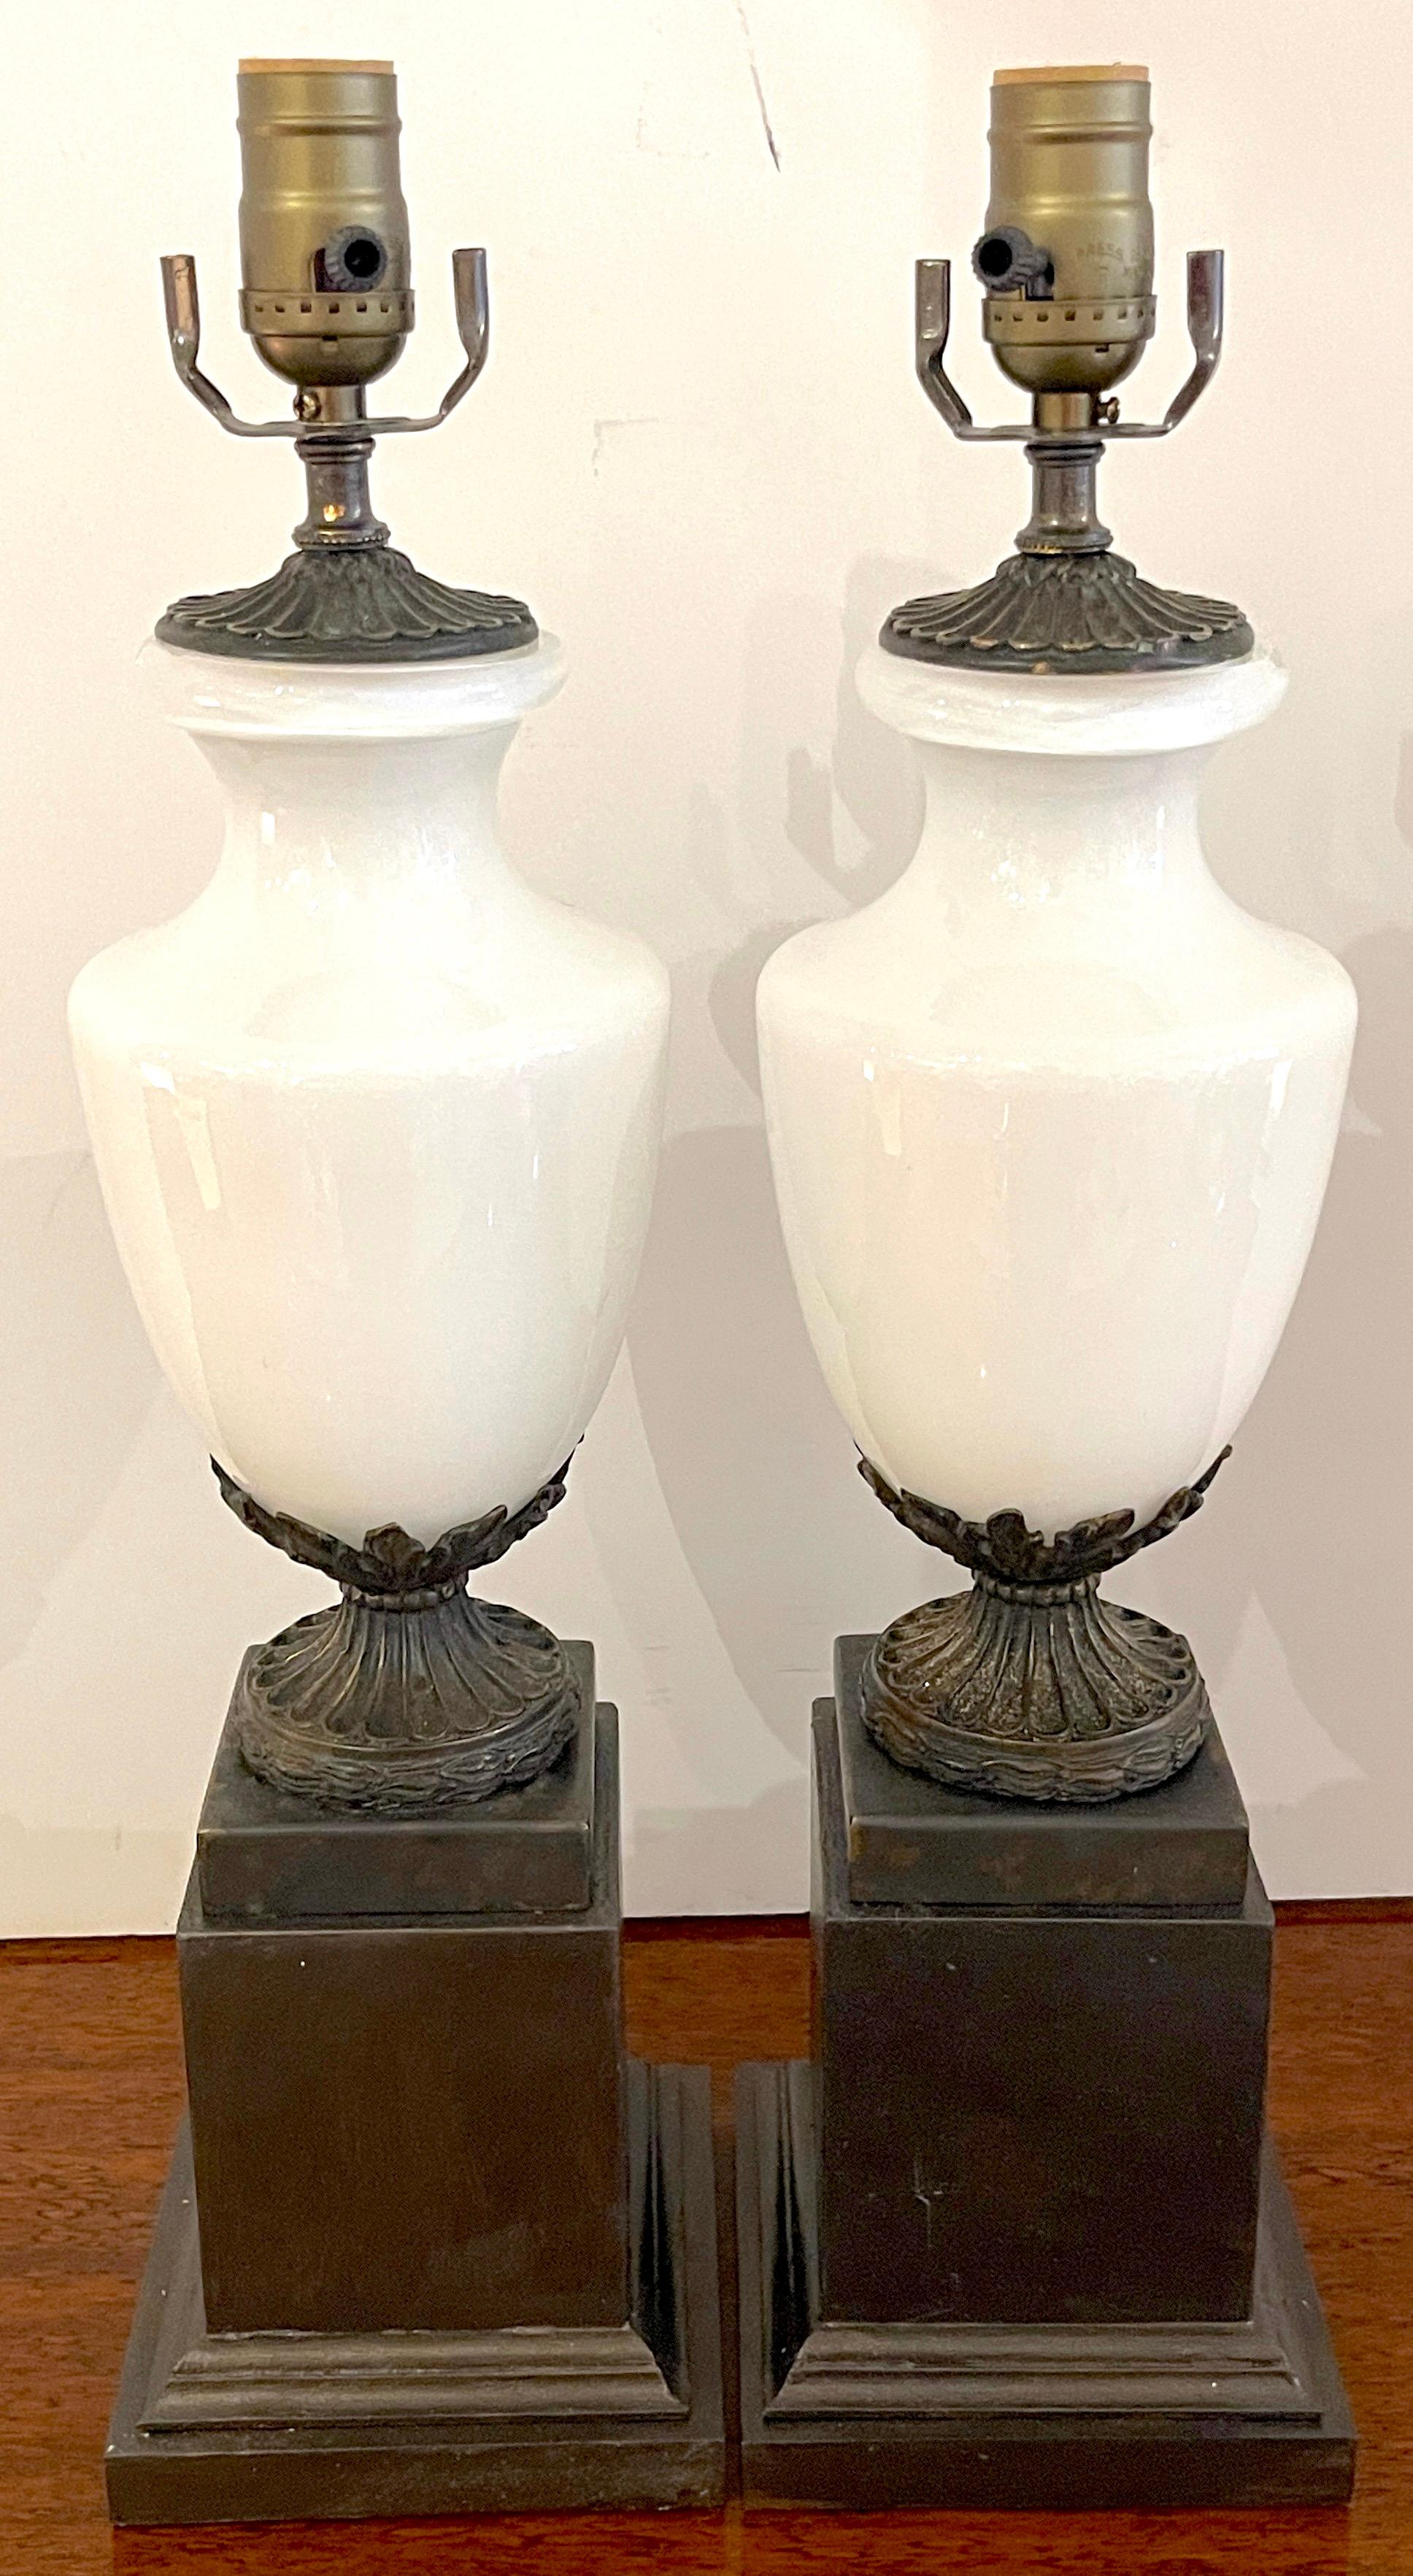 Pair of French neoclassical bronze mounted opaline vases, now as lamps
France, 20th century
Each one with a white opaline glass urn of typical form with cast and patinated acanthus motif mounts raised on ebonized pedestal bases. New